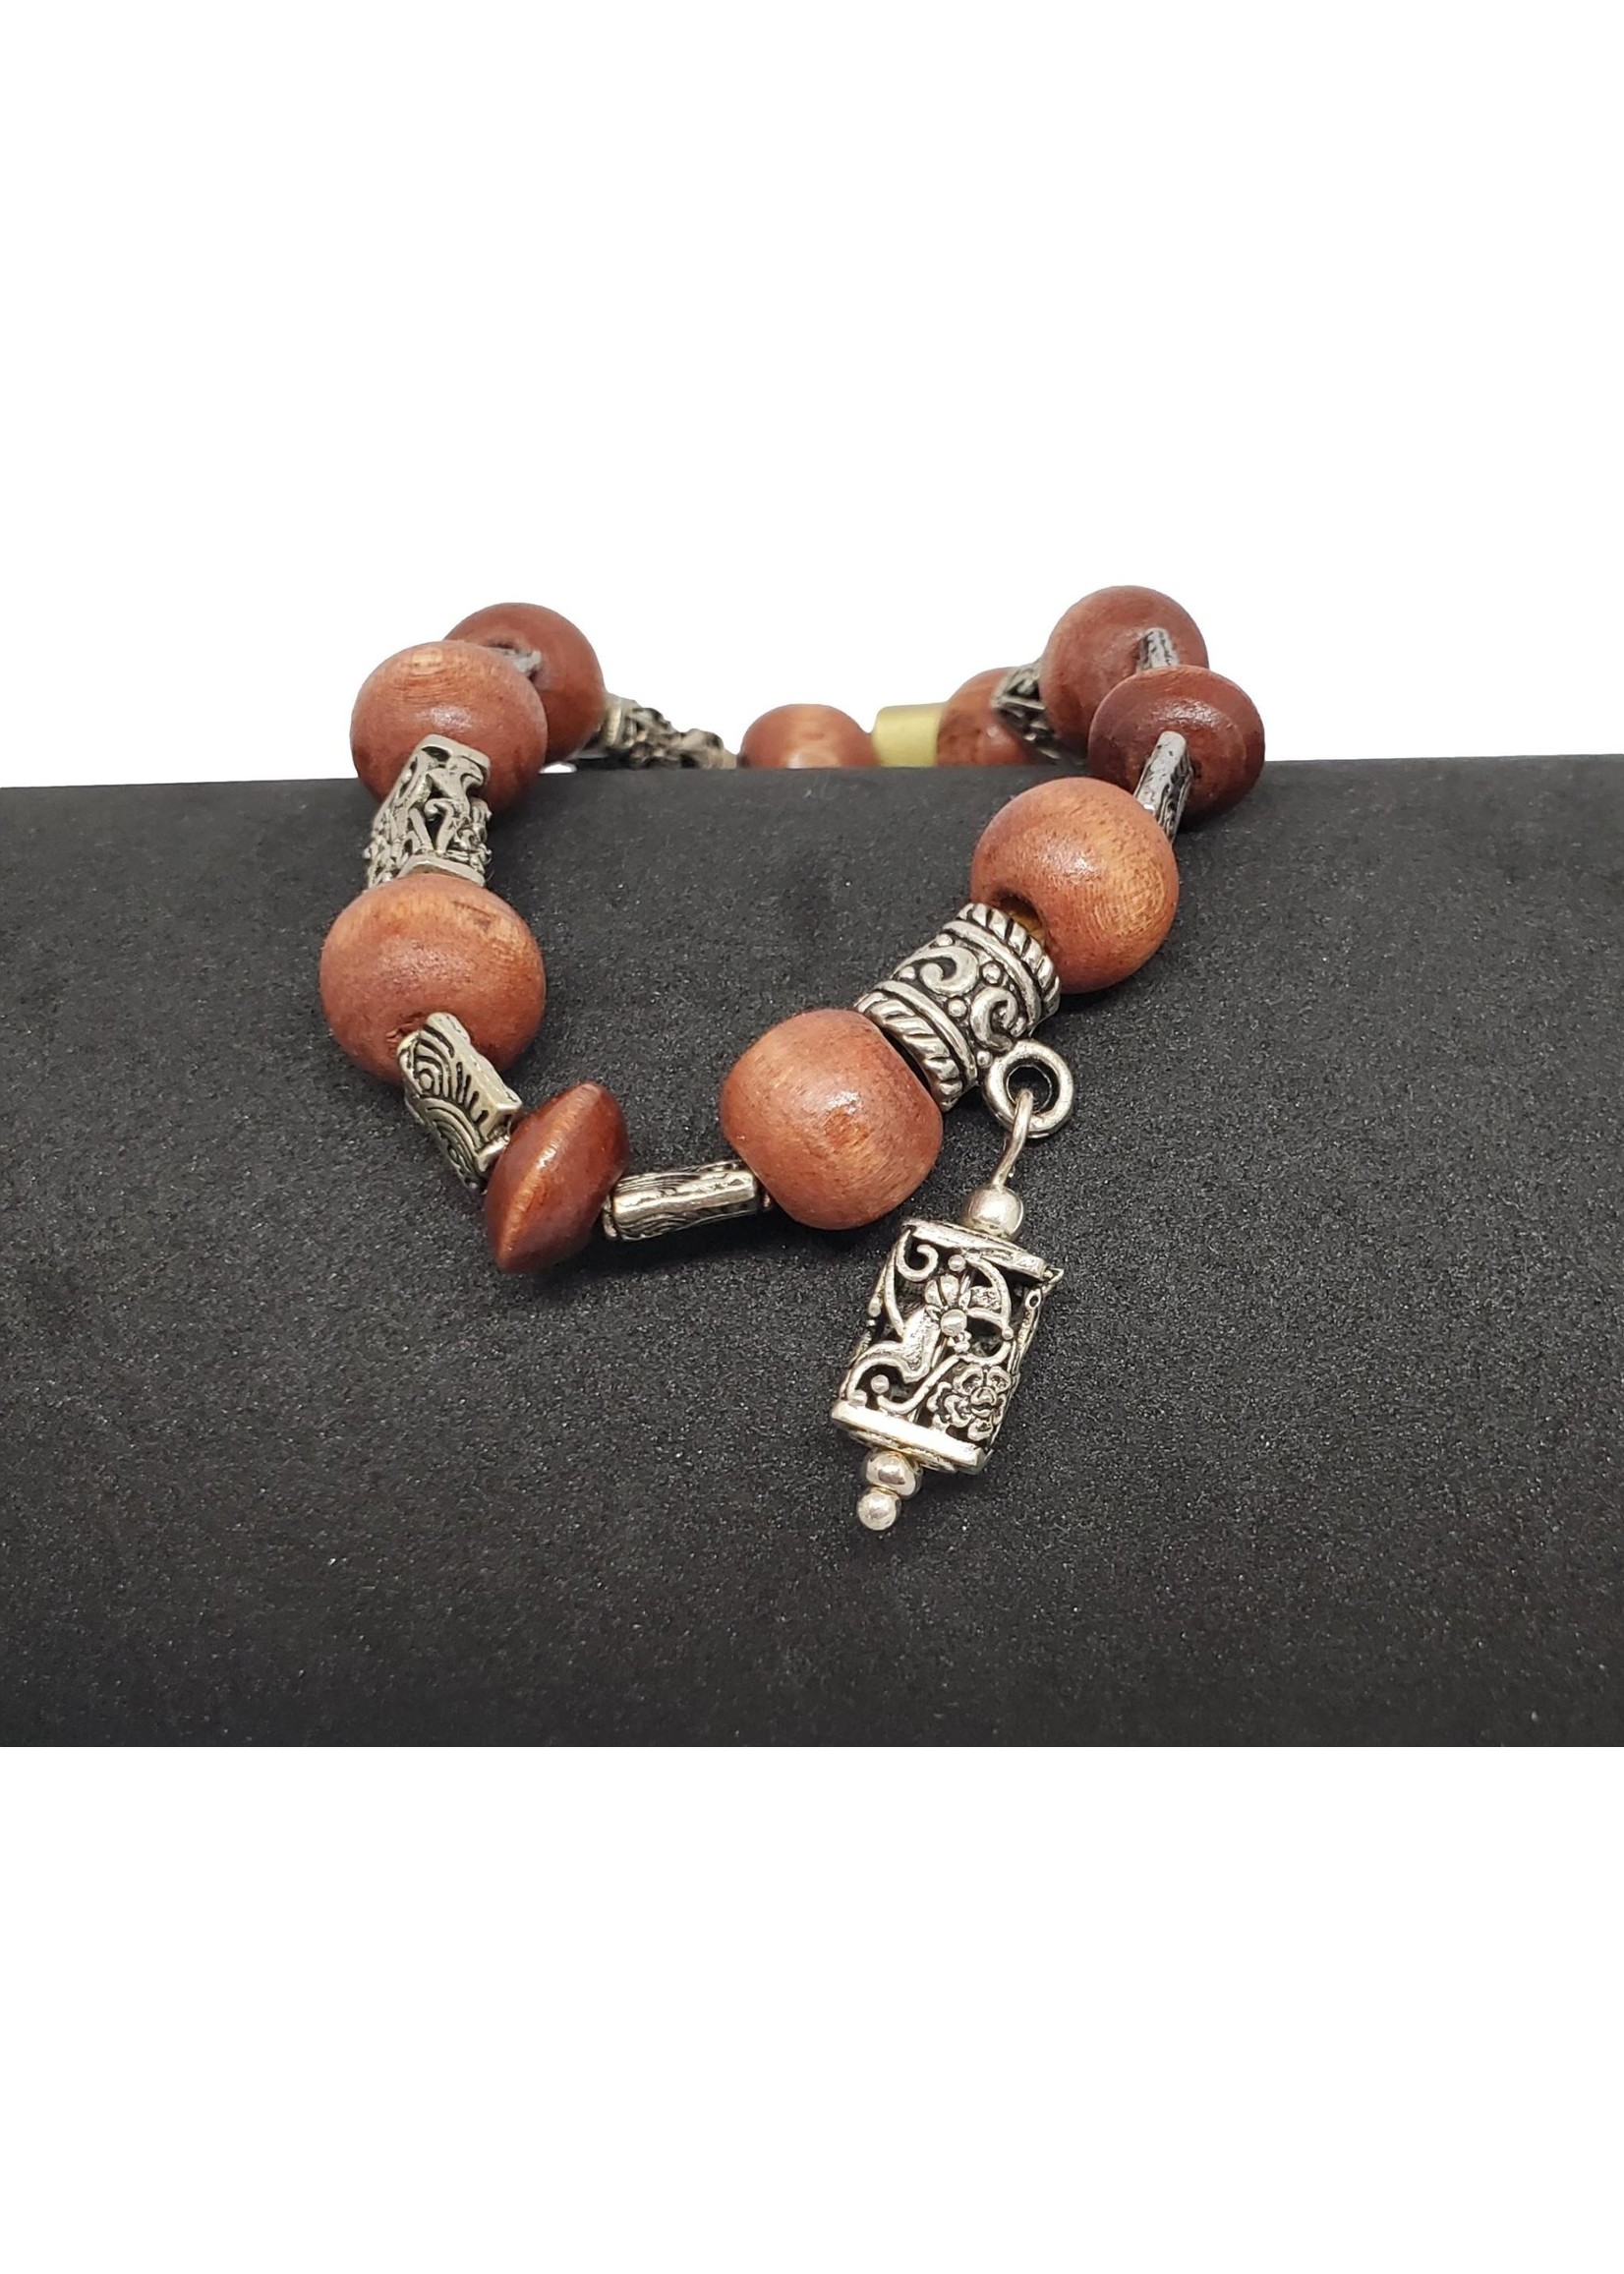 Jewellery by Deborah Young-Groves Wood Beads with Silver Tibetan Beads Bracelet